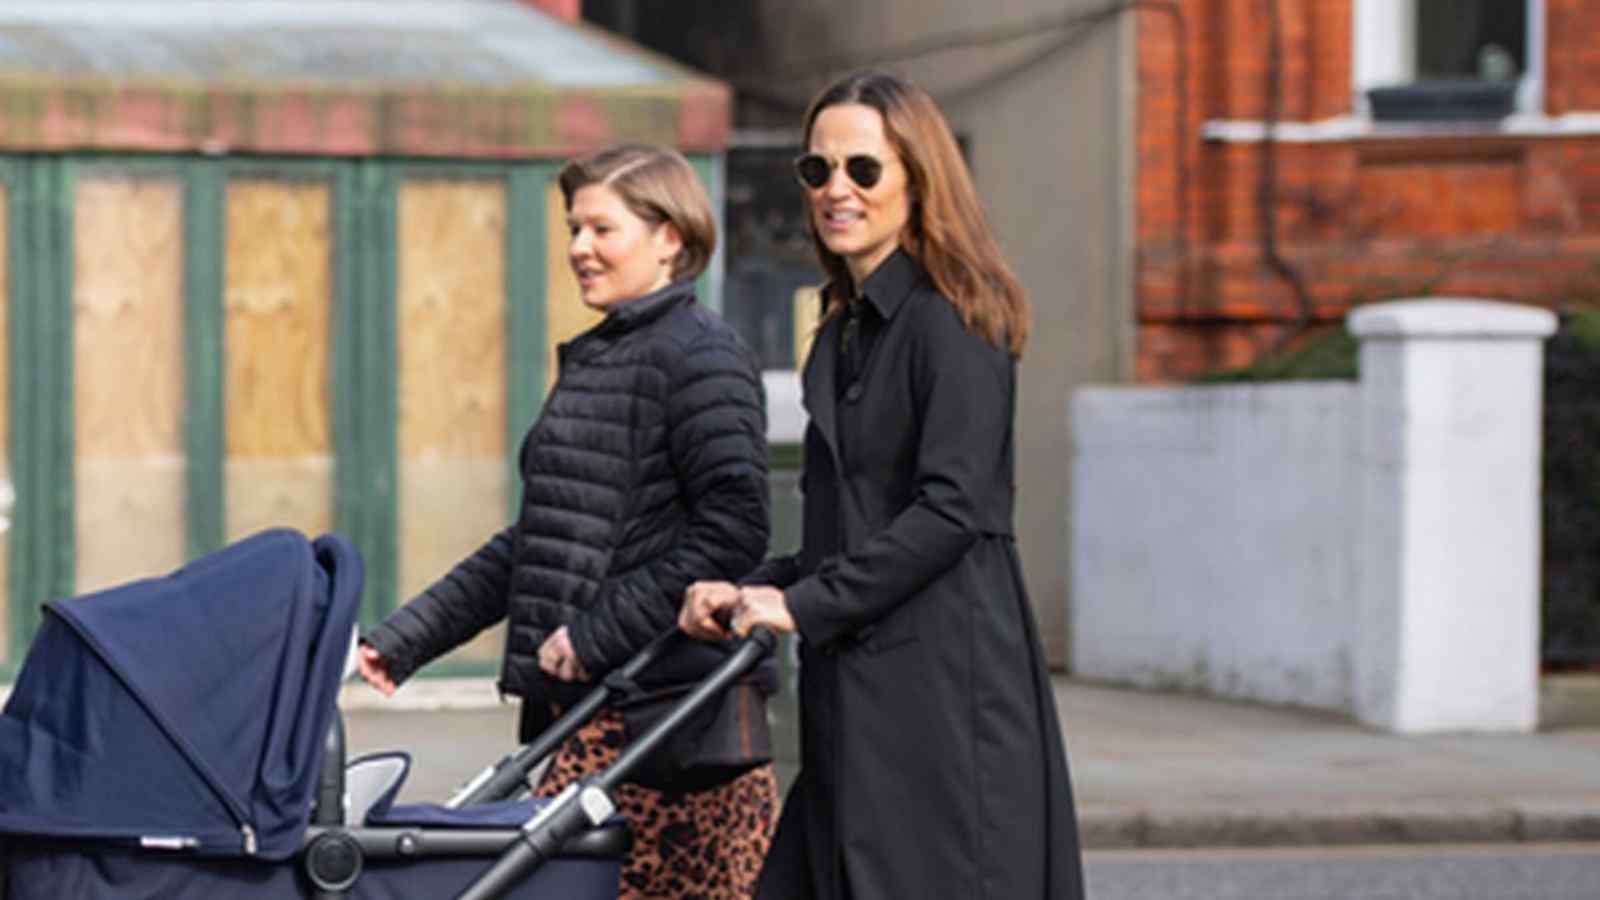 Pippa Middleton with her new born baby in cramp